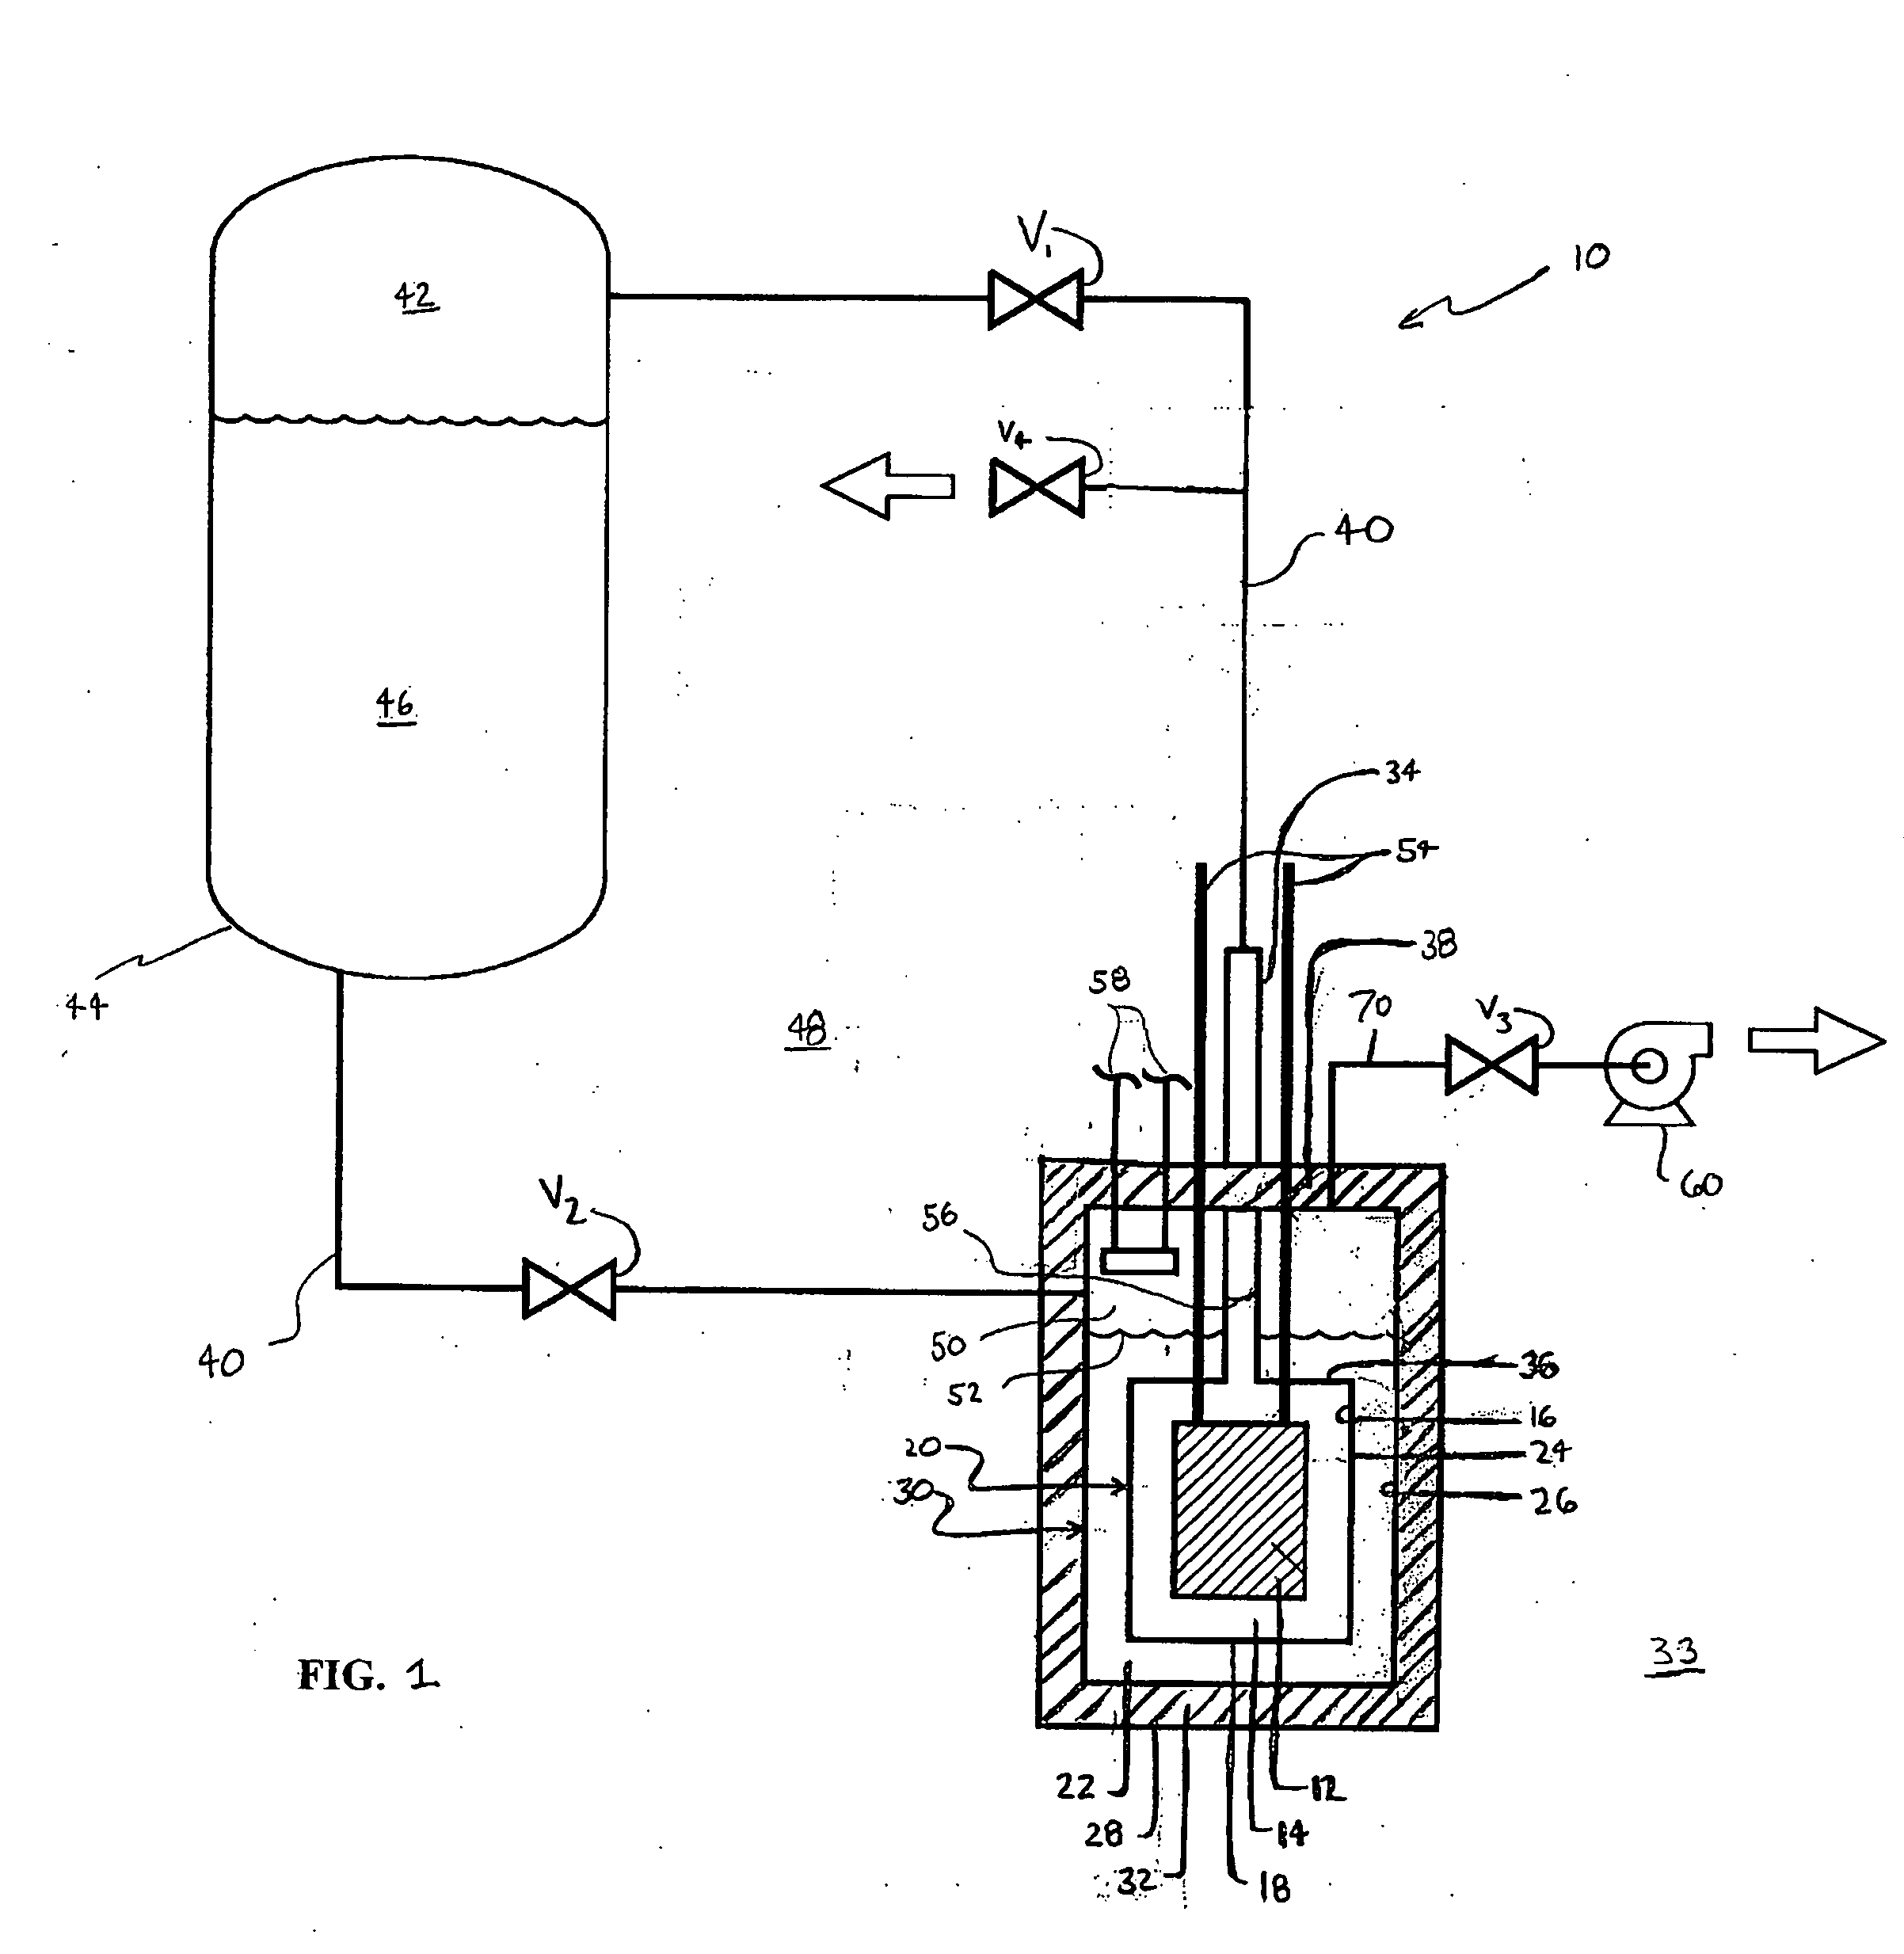 Multi-bath apparatus and method for cooling superconductors